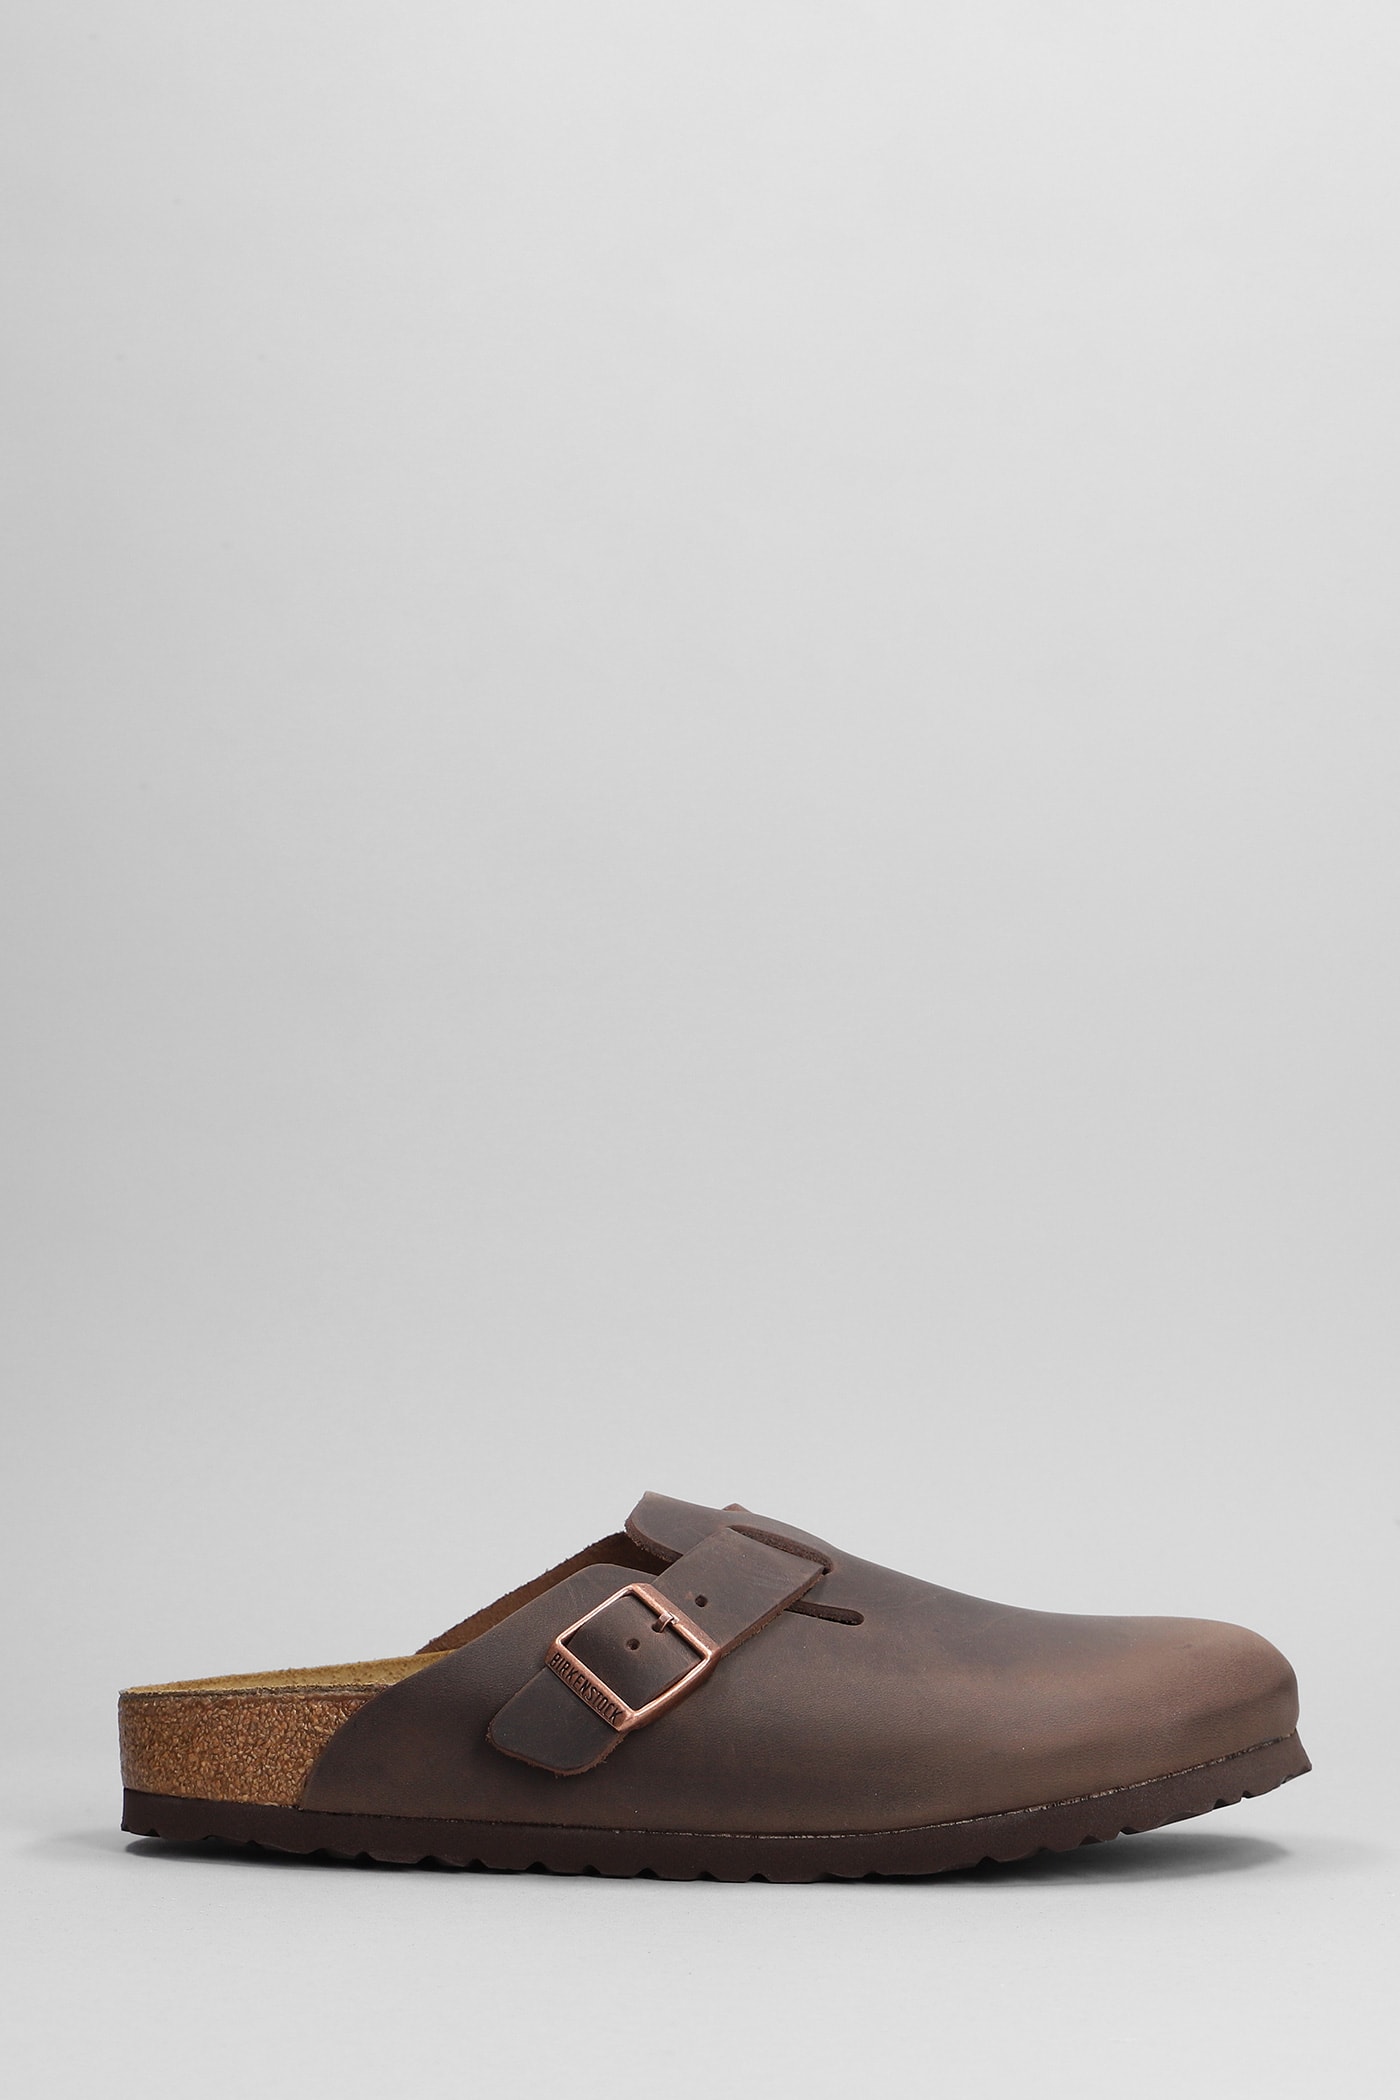 Boston Flats In Brown Leather